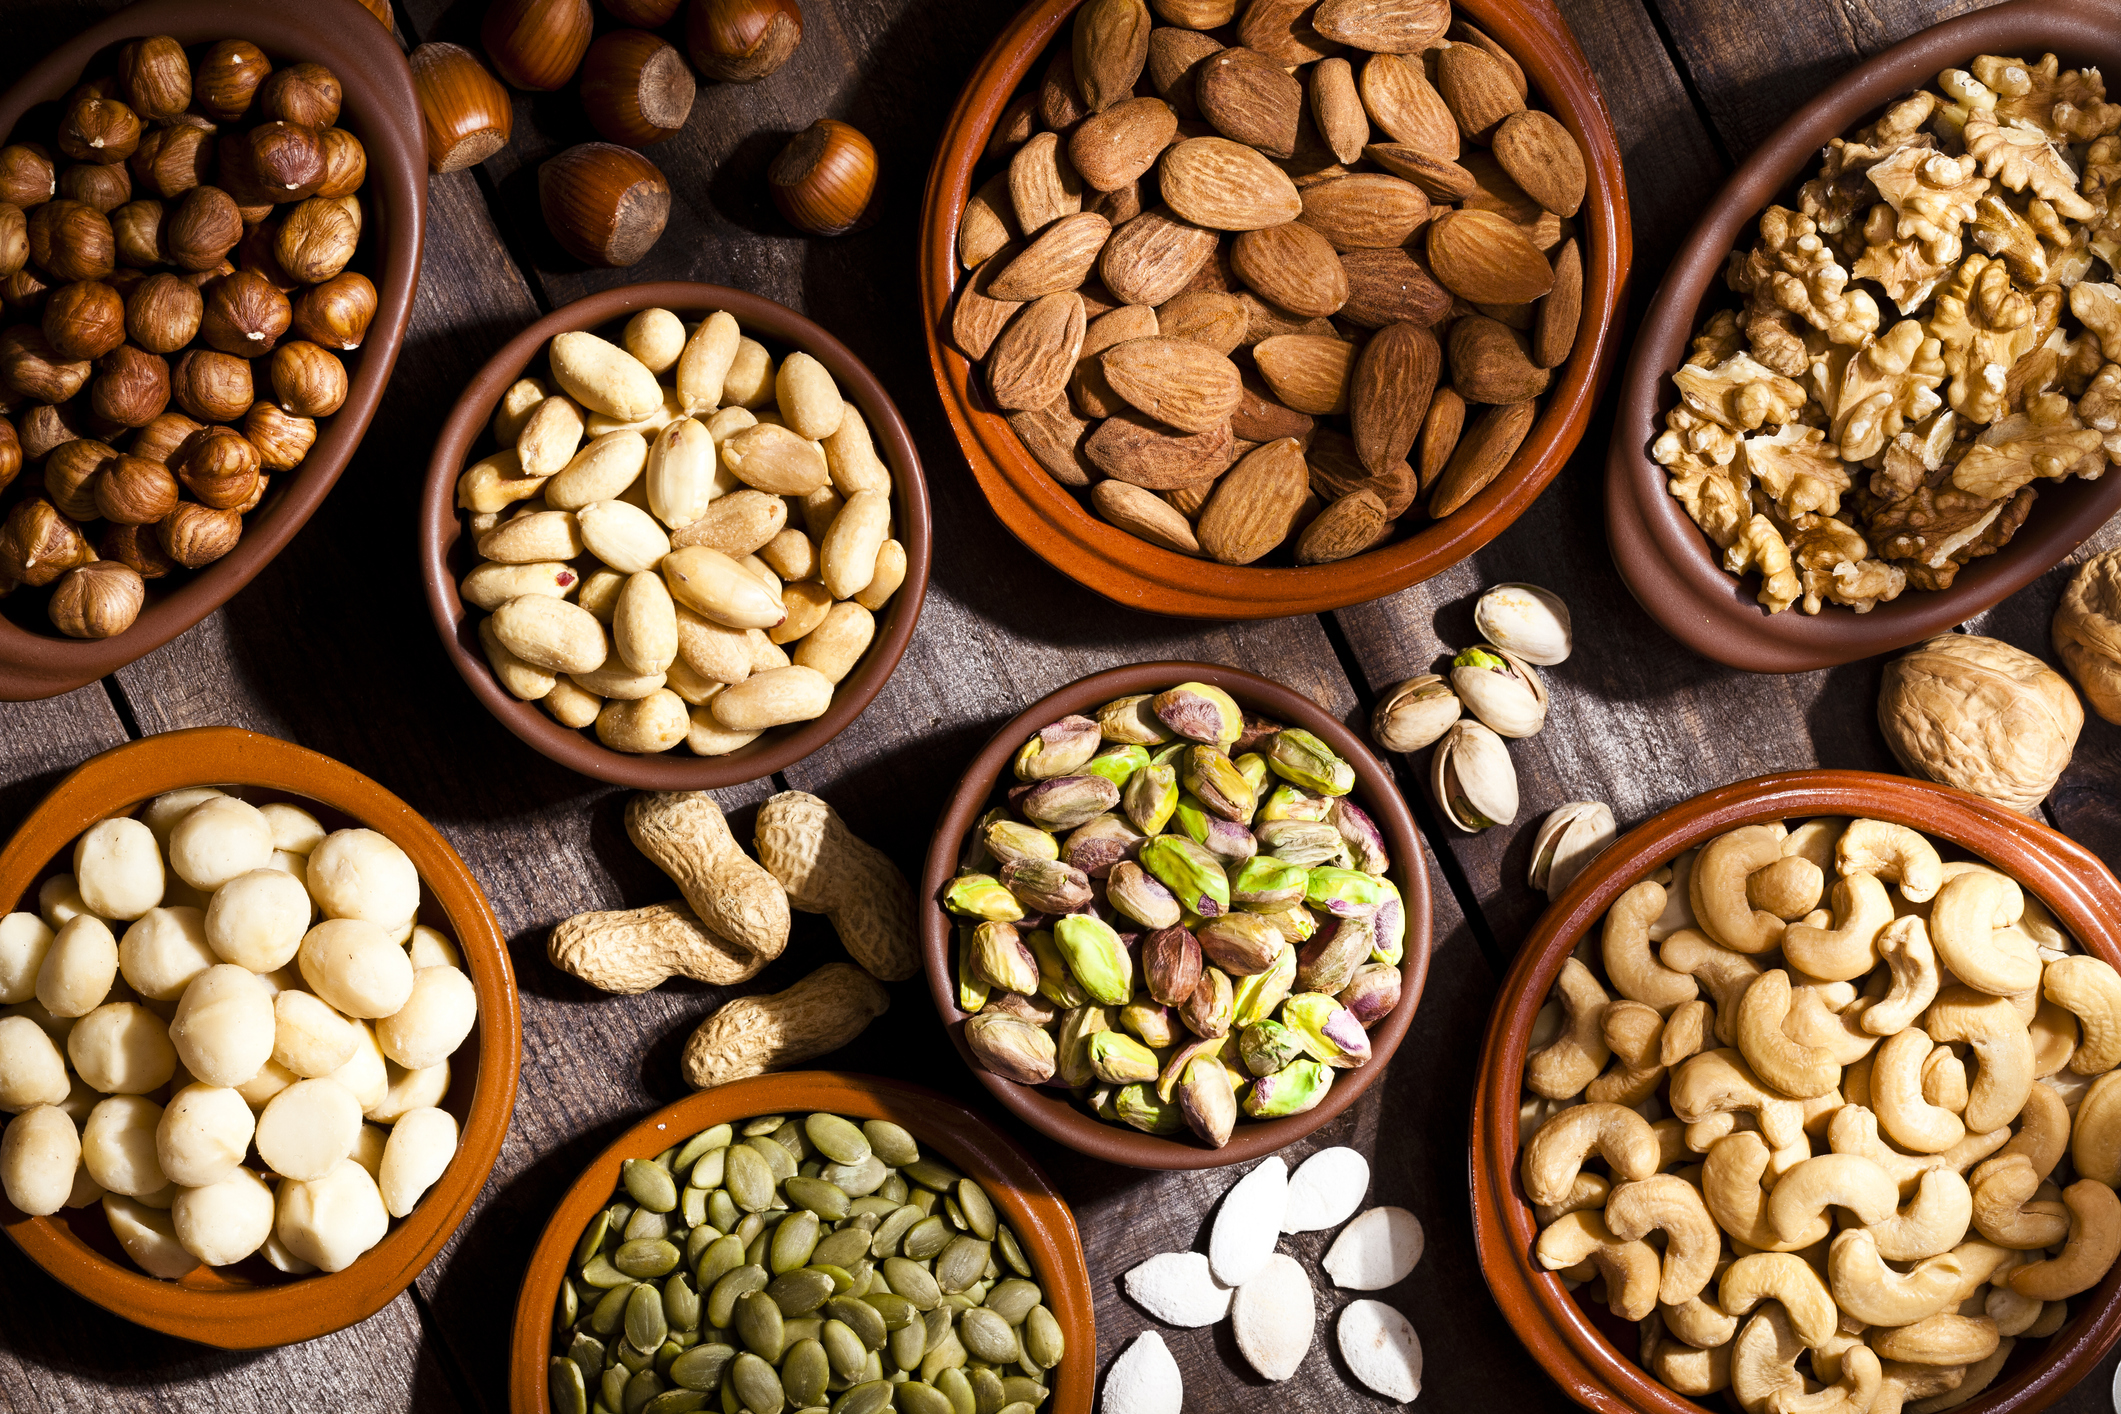 What nuts to choose to improve potency